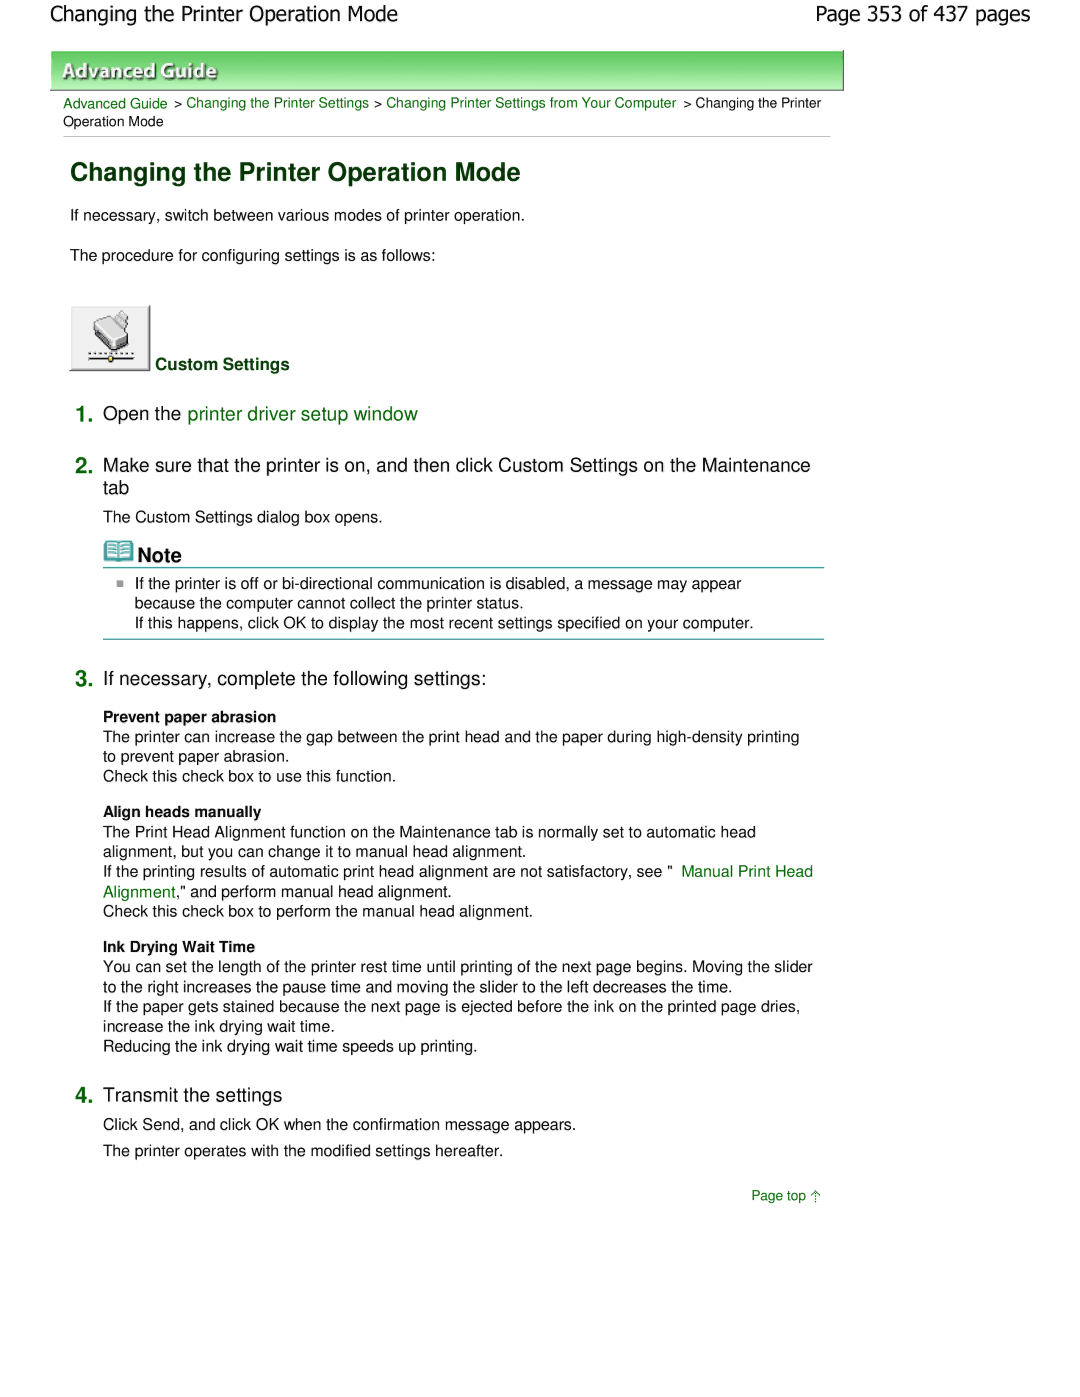 Canon iP4700 manual Changing the Printer Operation Mode, 353 of 437 pages, Custom Settings 